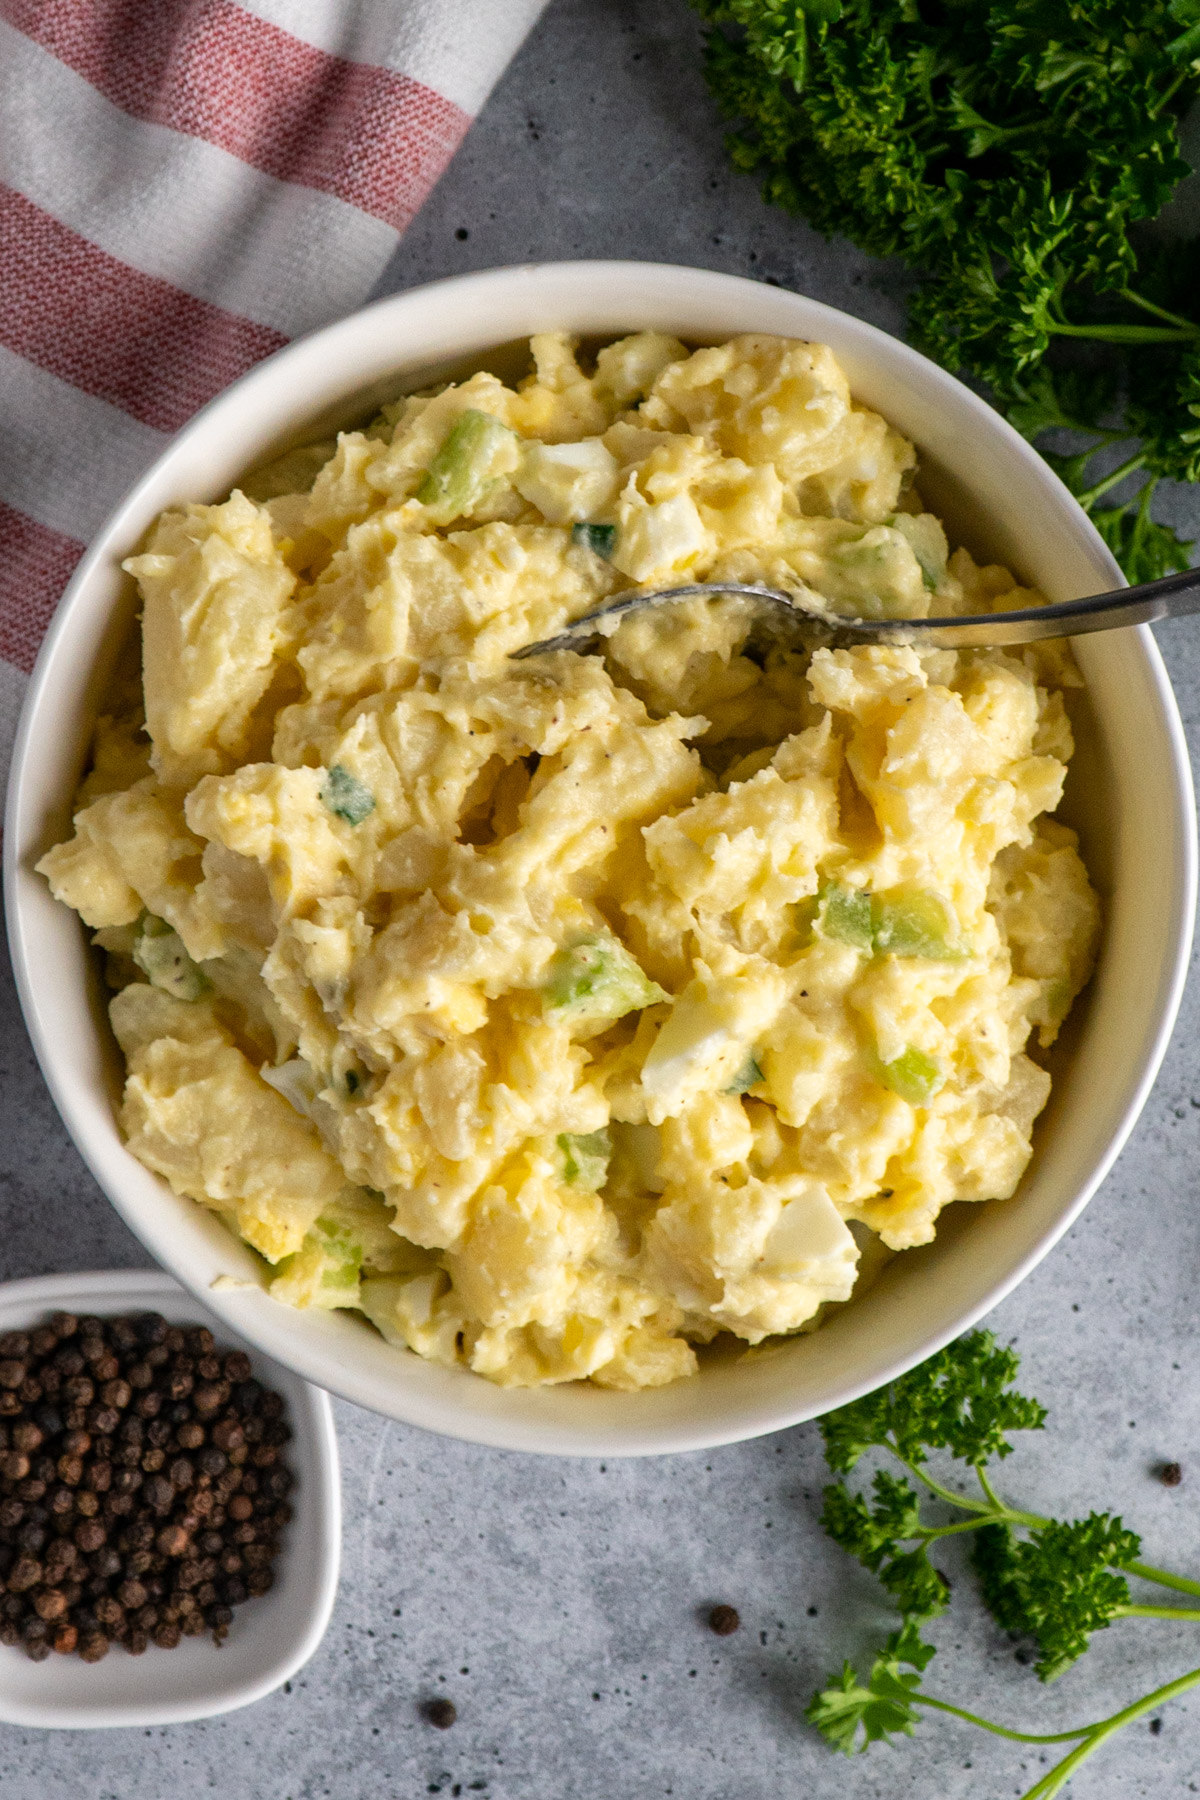 A spoon in a bowl of homemade potato salad.